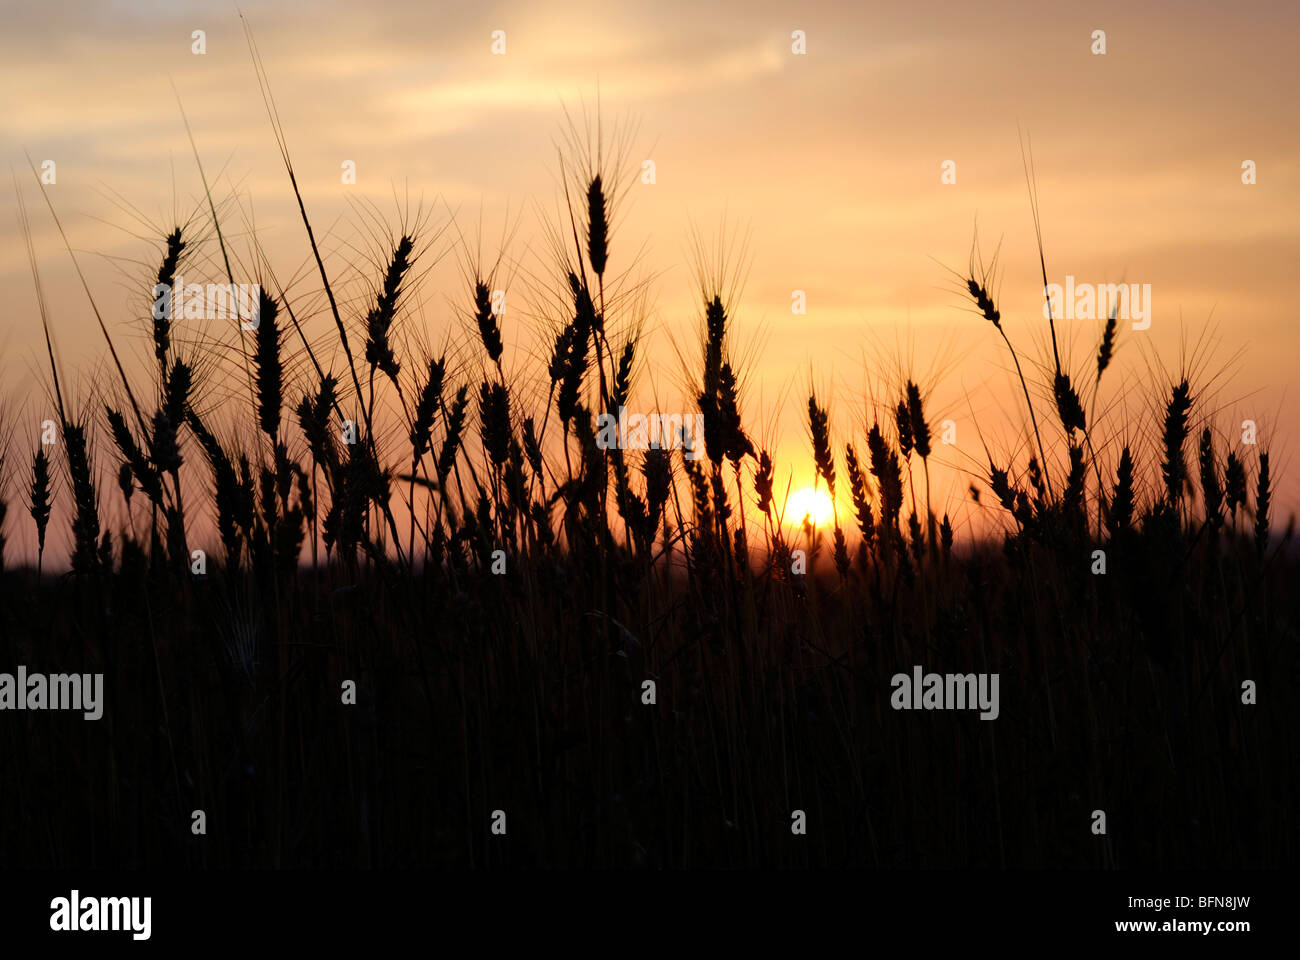 Silhouette of wheat stalks and grain at sunset Stock Photo